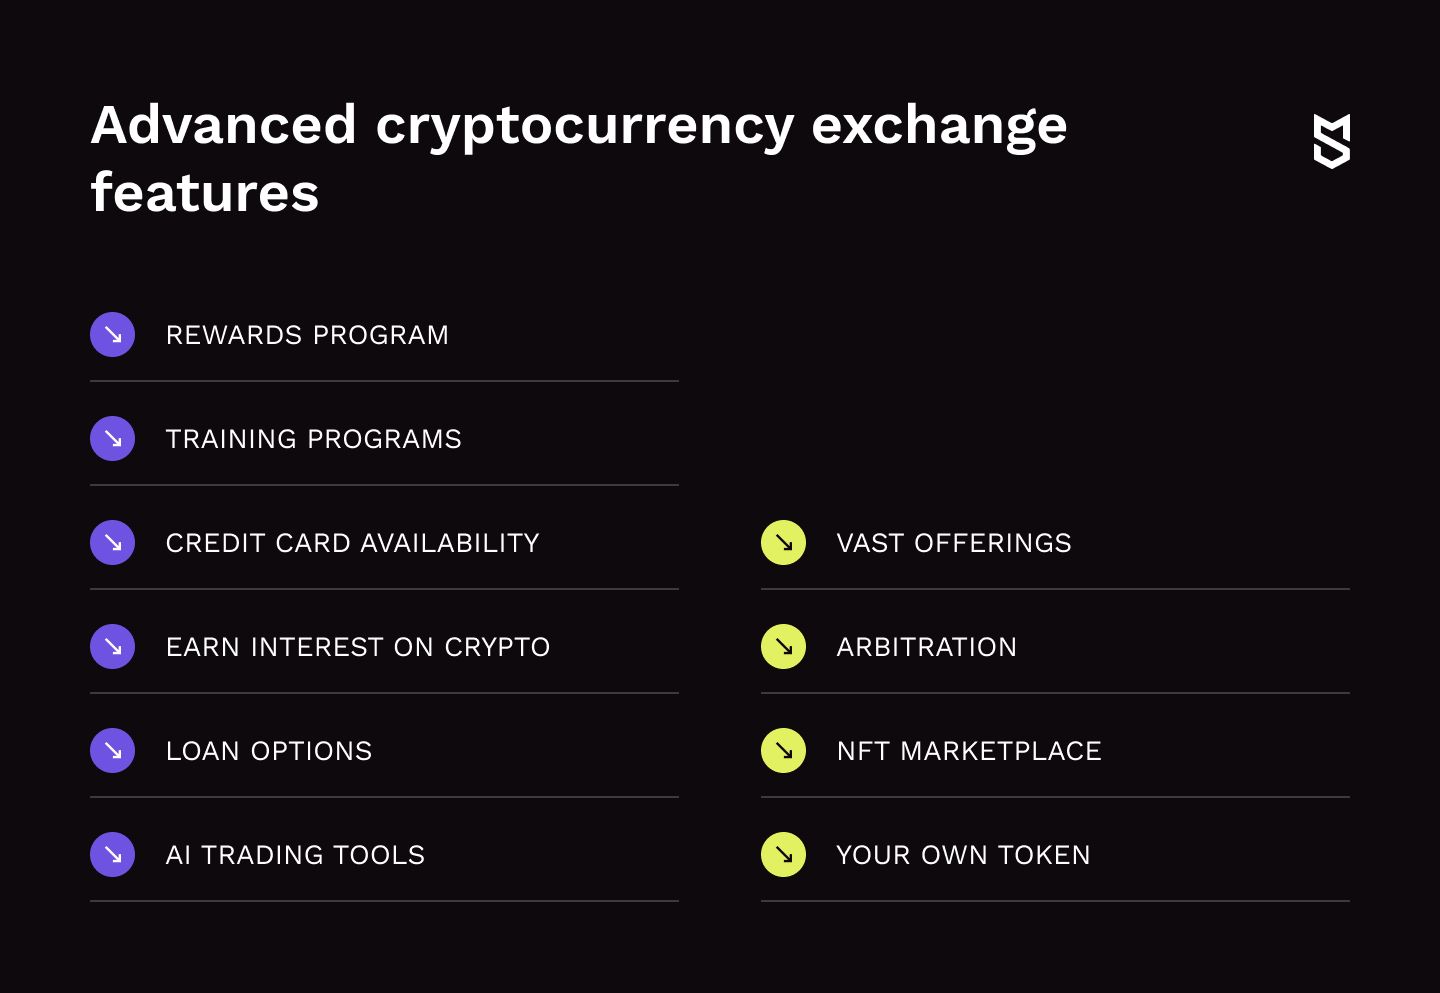 Advanced cryptocurrency exchange features